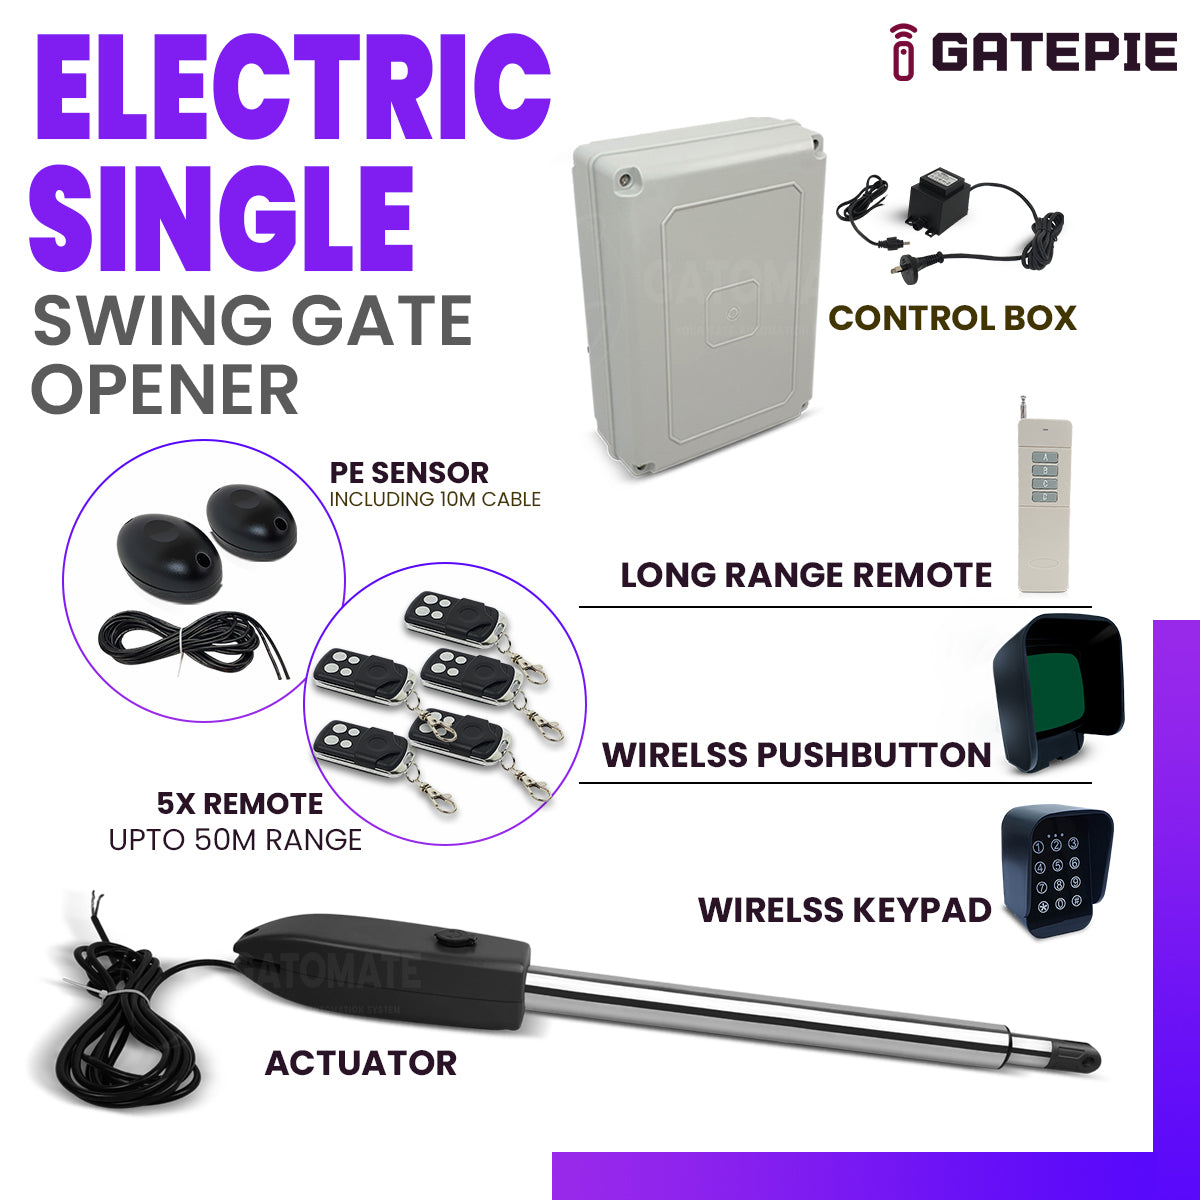 Automatic Electric Single Swing Gate Opener